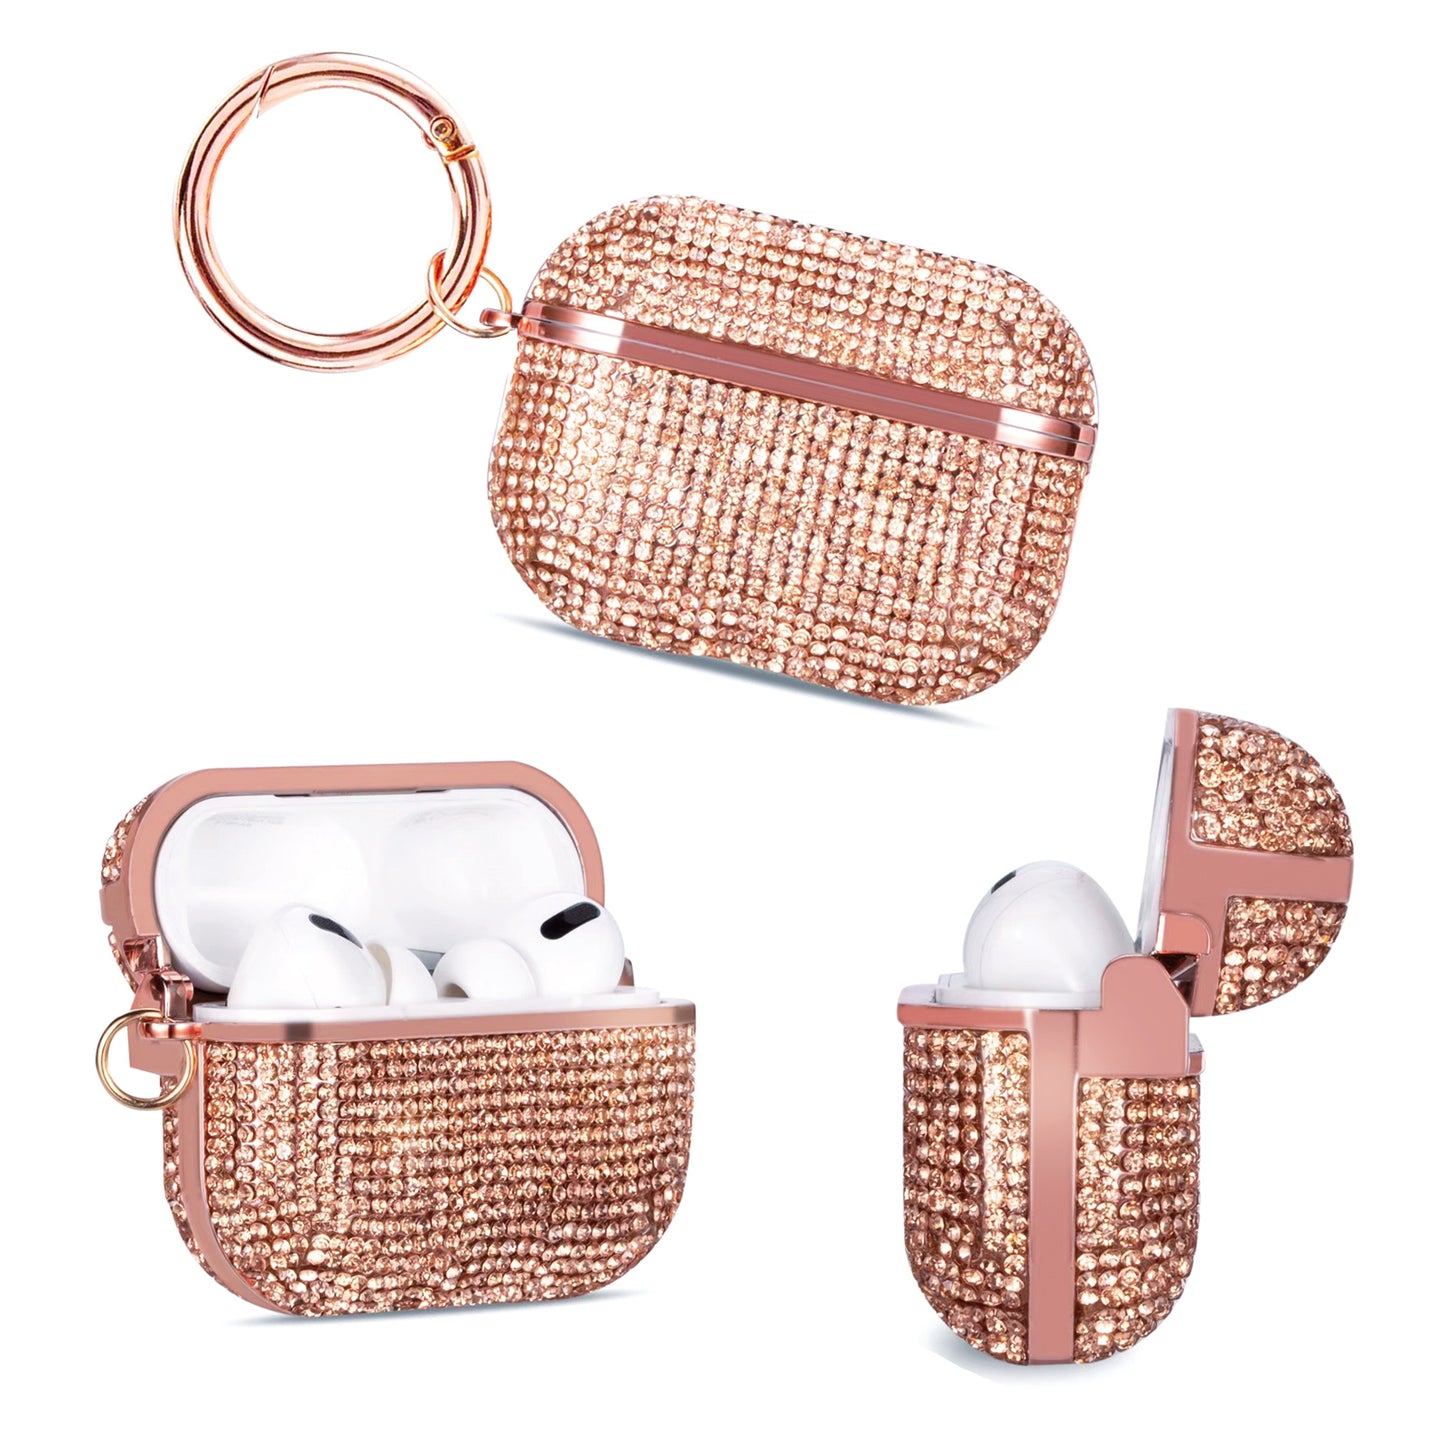 New Shiny Glitter Case for Apple AirPods 3 , Airpods Pro and Airpods Pro2 Case Glitter and Keychain